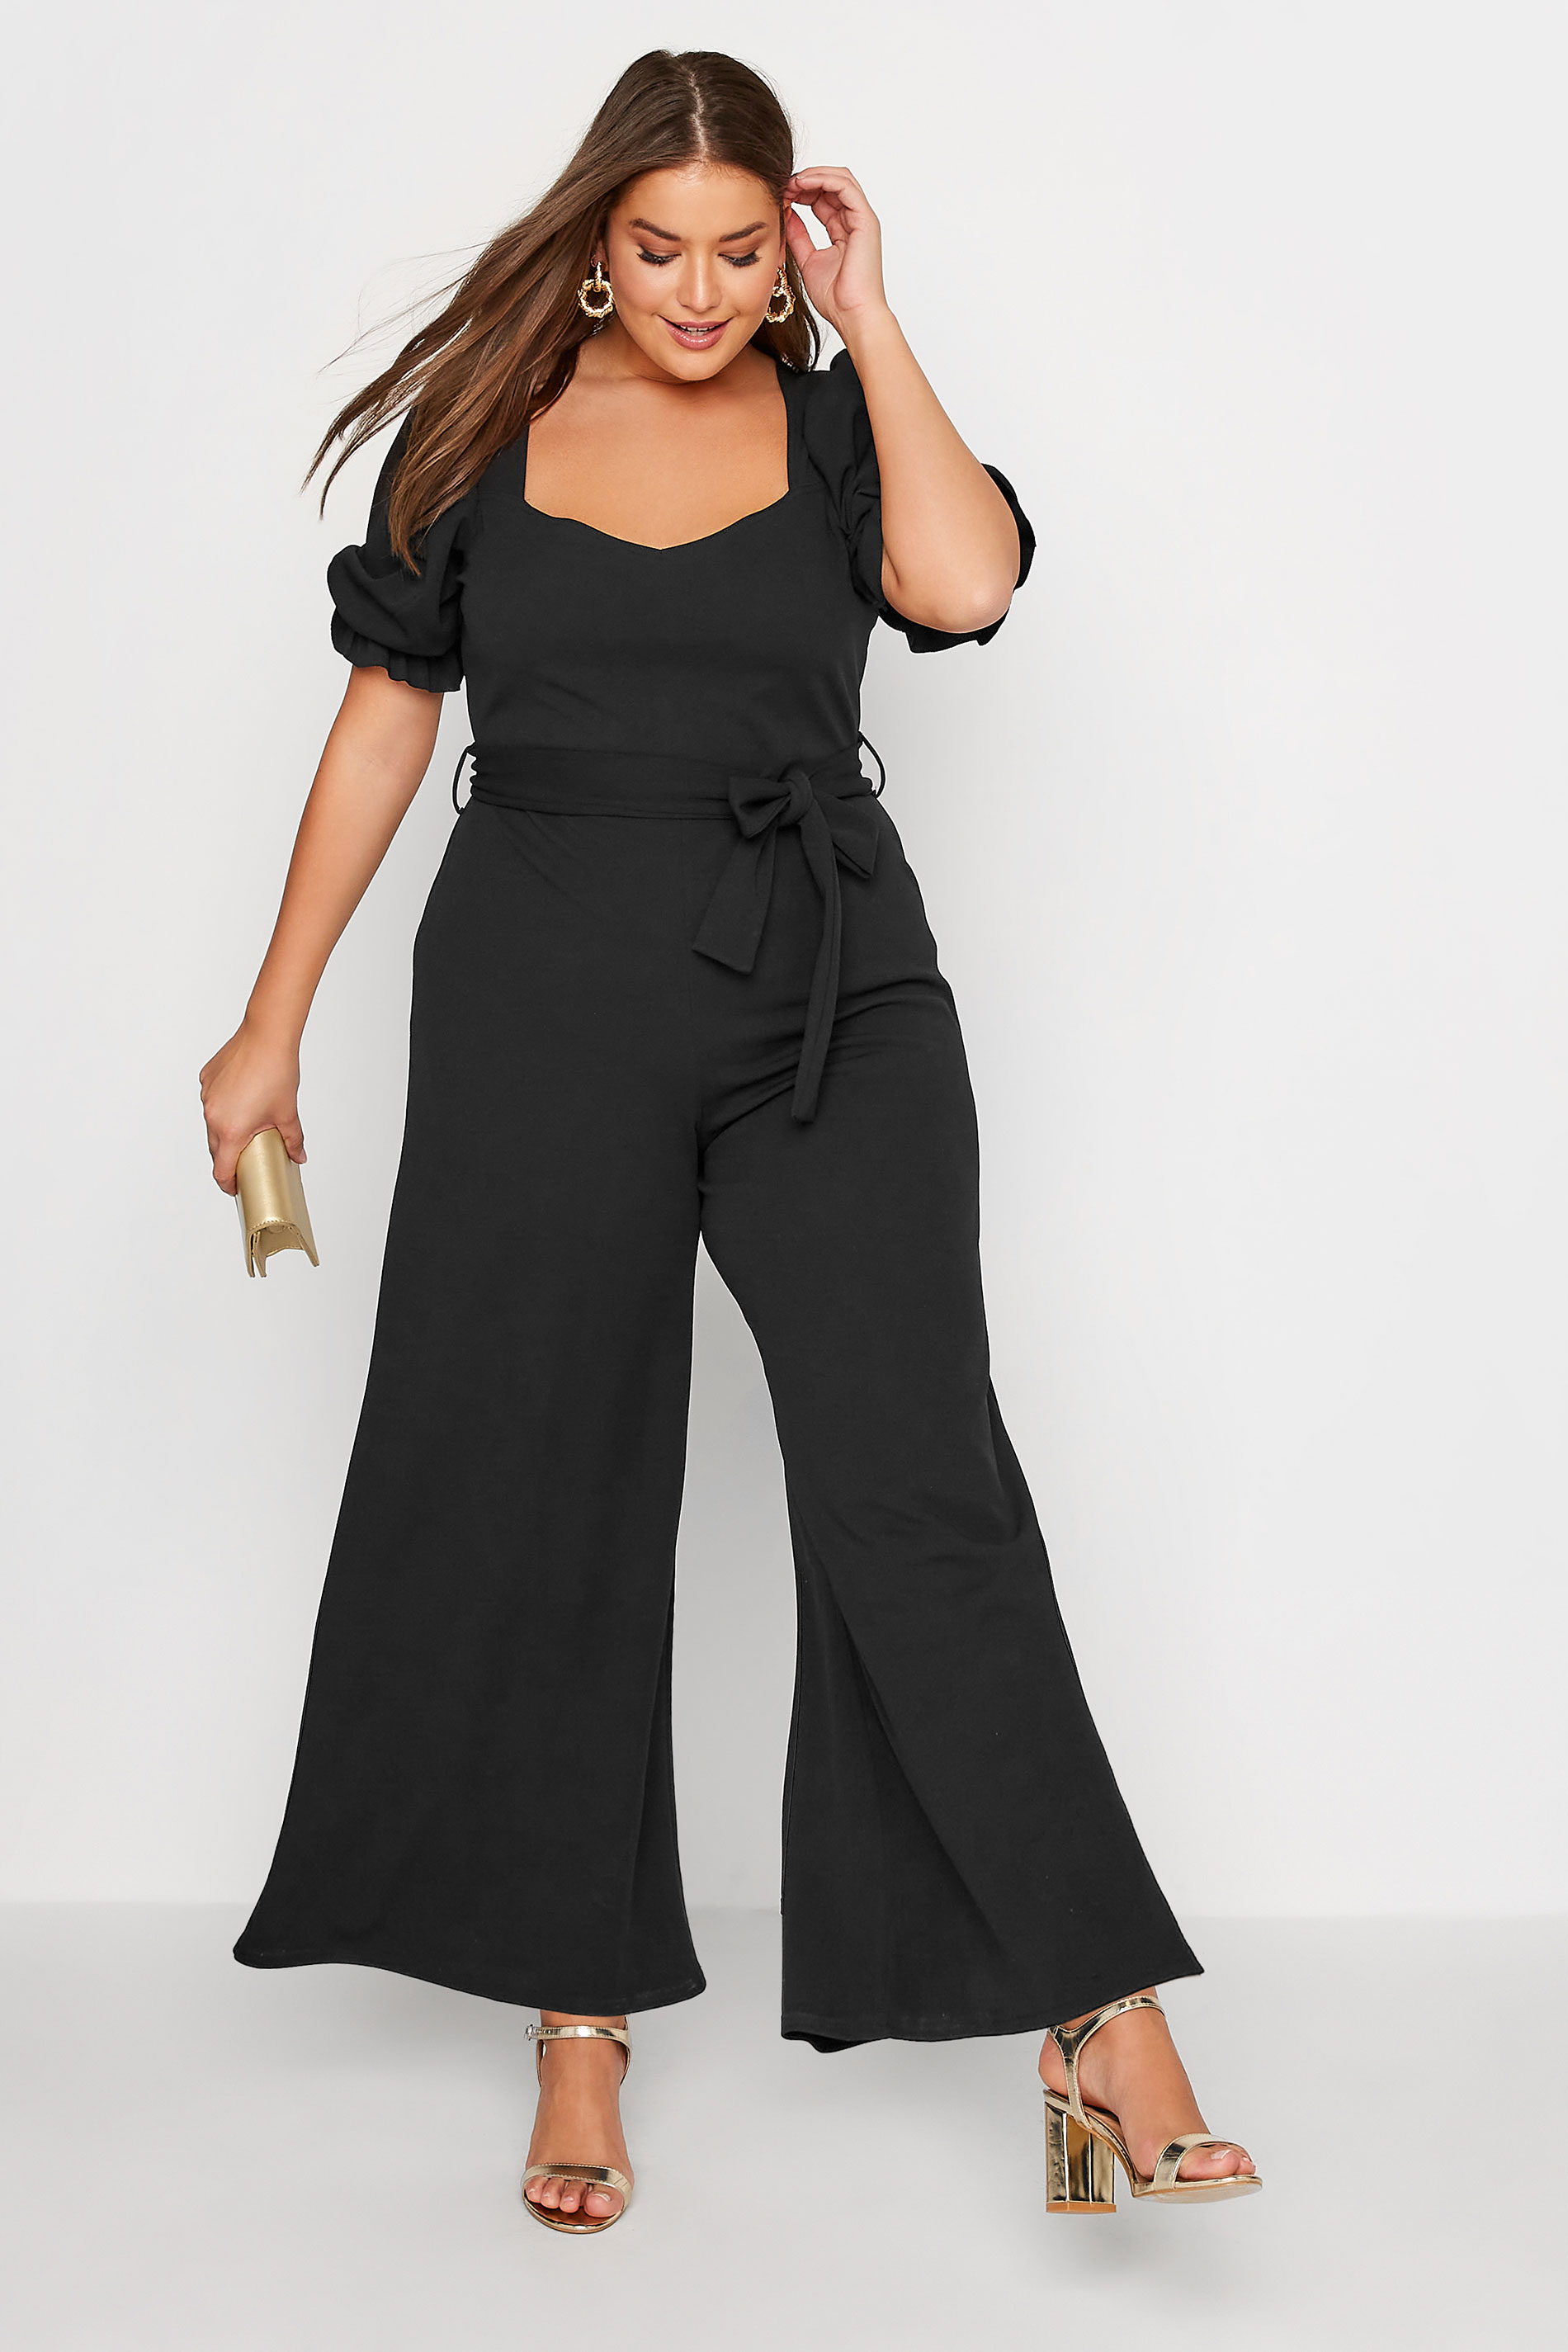 YOURS LONDON Plus Size Black Sweetheart Puff Jumpsuit Clothing